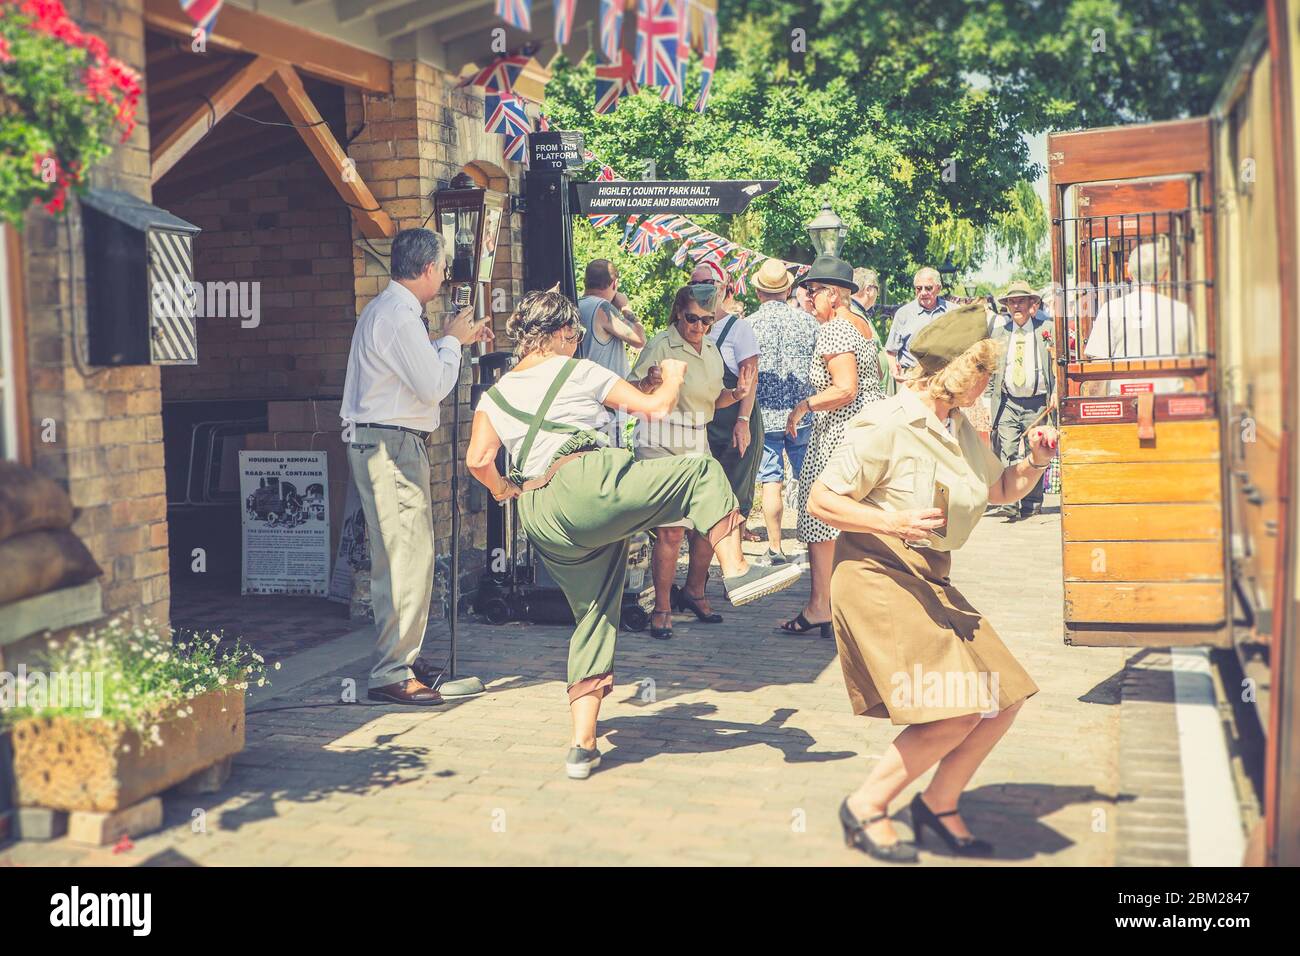 1940s WWII wartime Britain event, Severn Valley Railway, UK. People having fun dancing on vintage platform to live music in 1940s dress, costume. Stock Photo